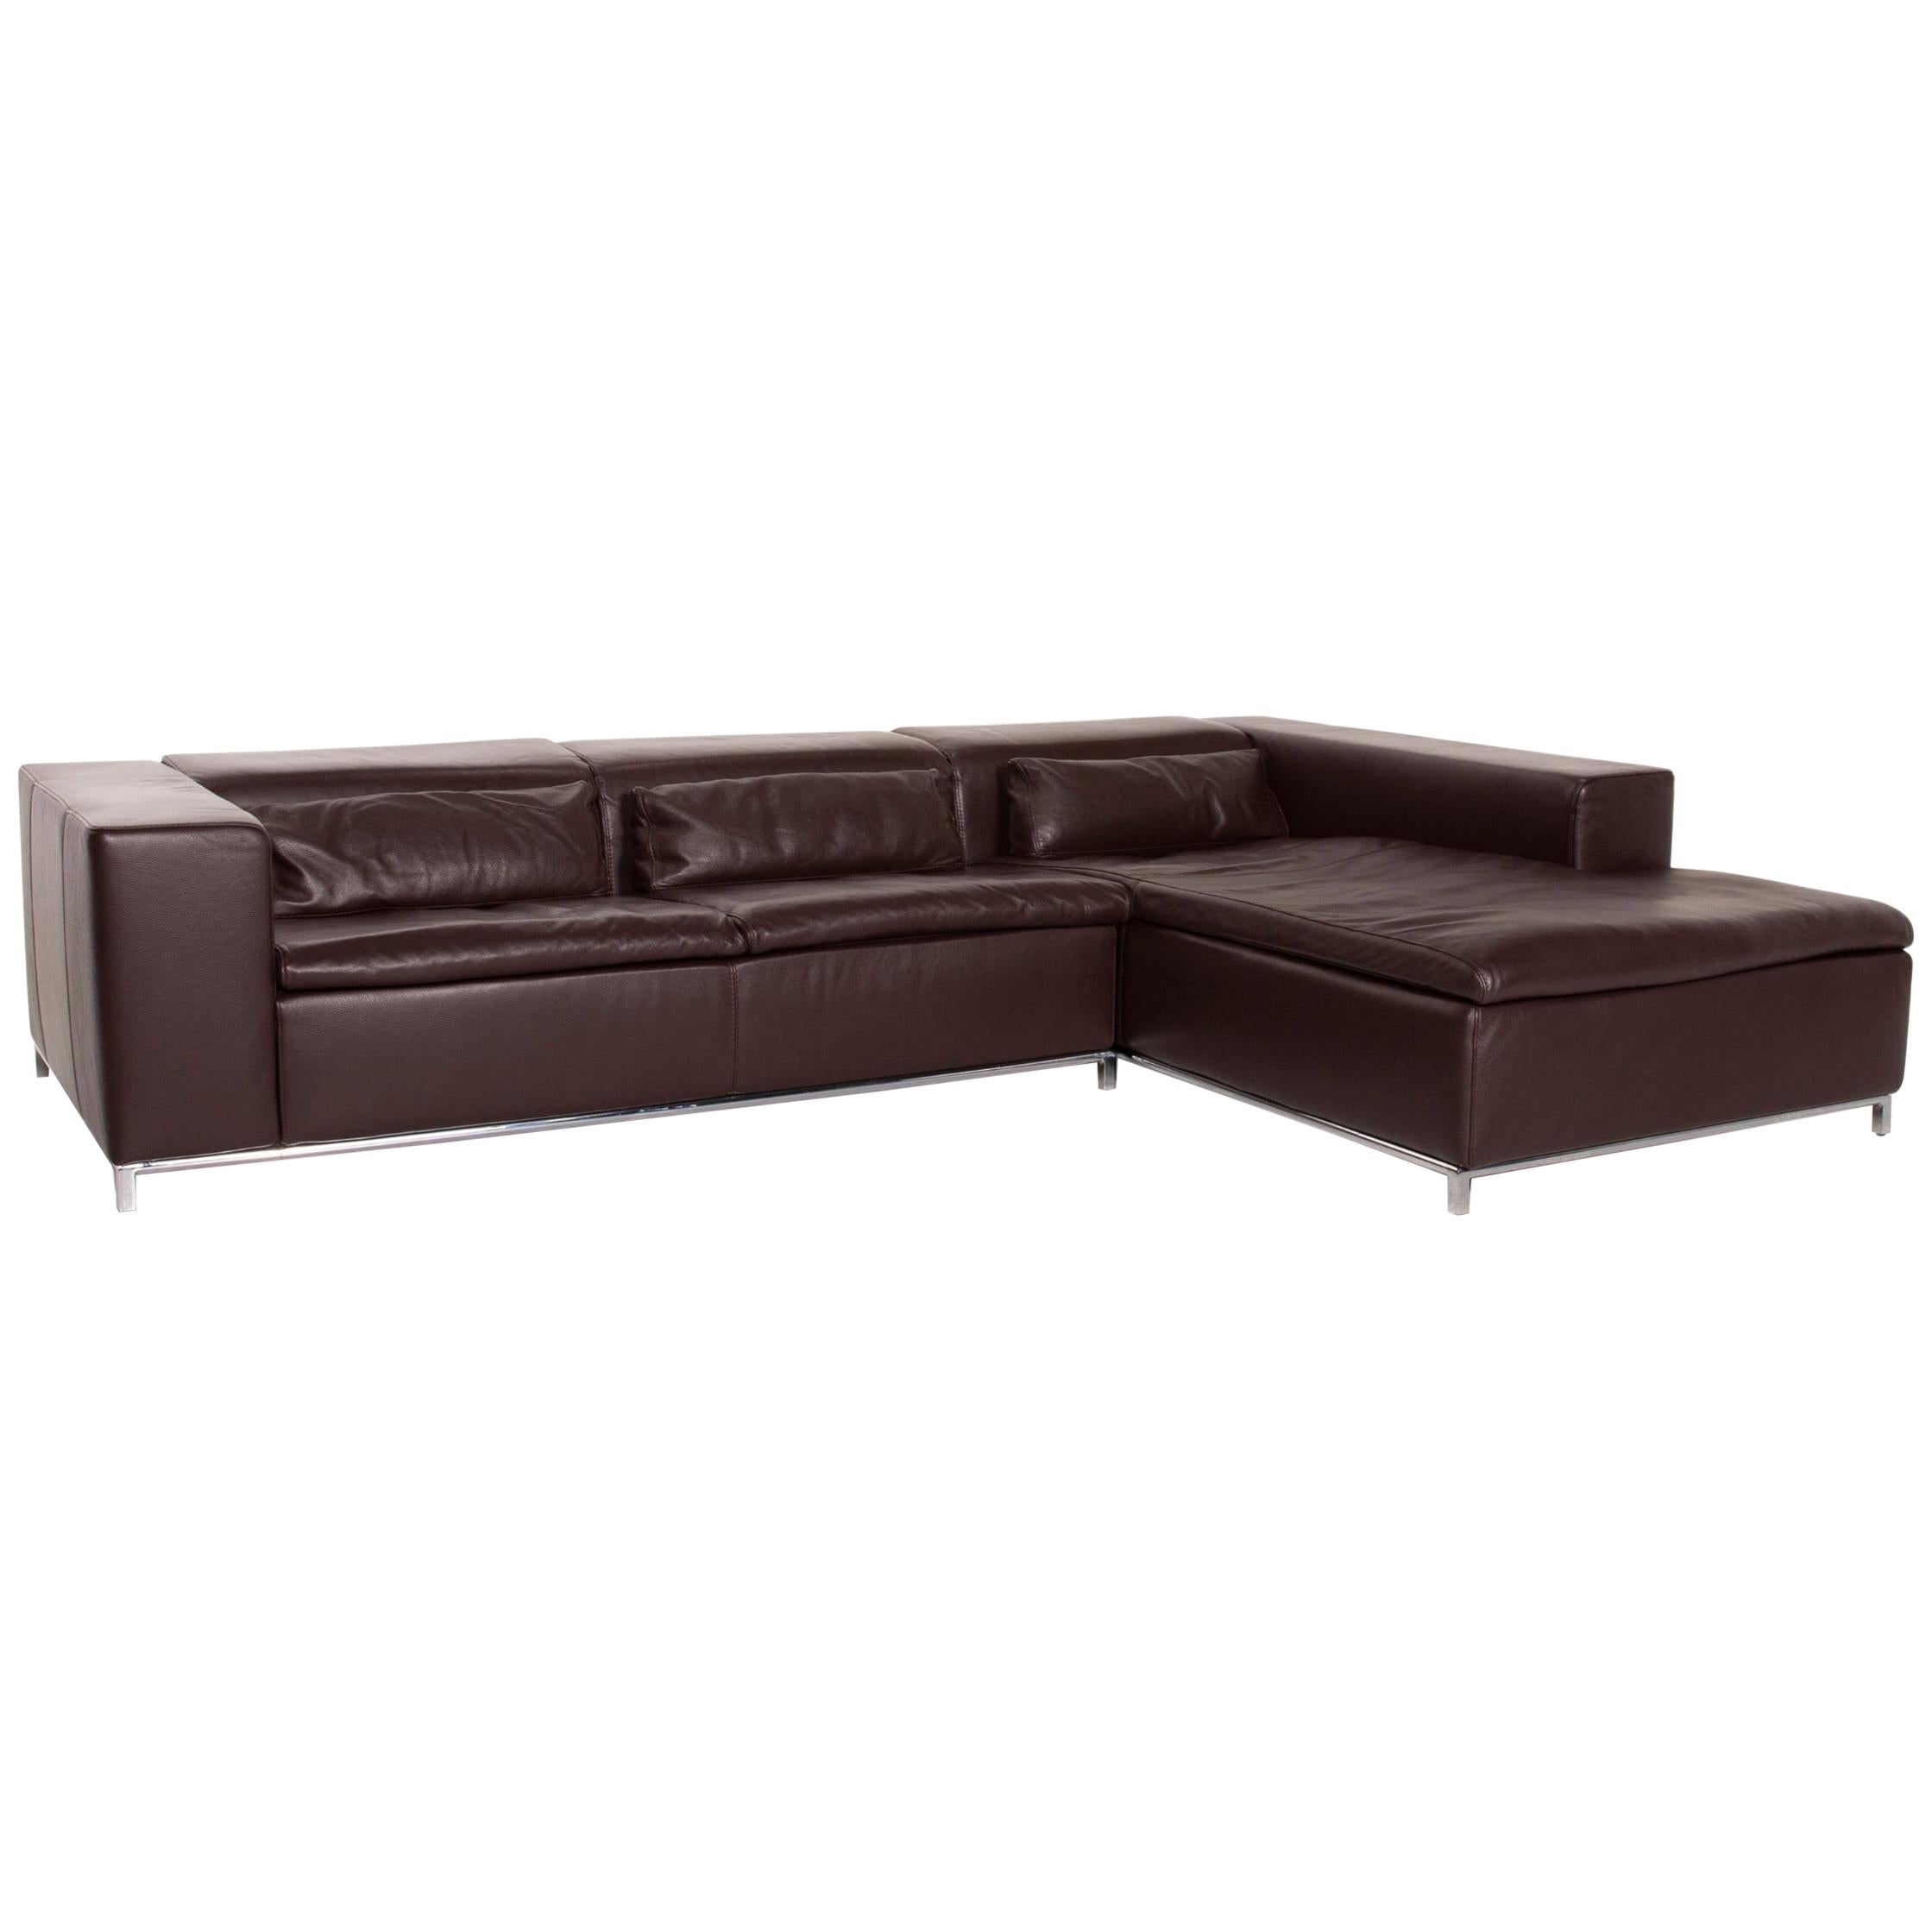 Who's Perfect Leather Corner Sofa Brown Dark Brown Sofa Couch